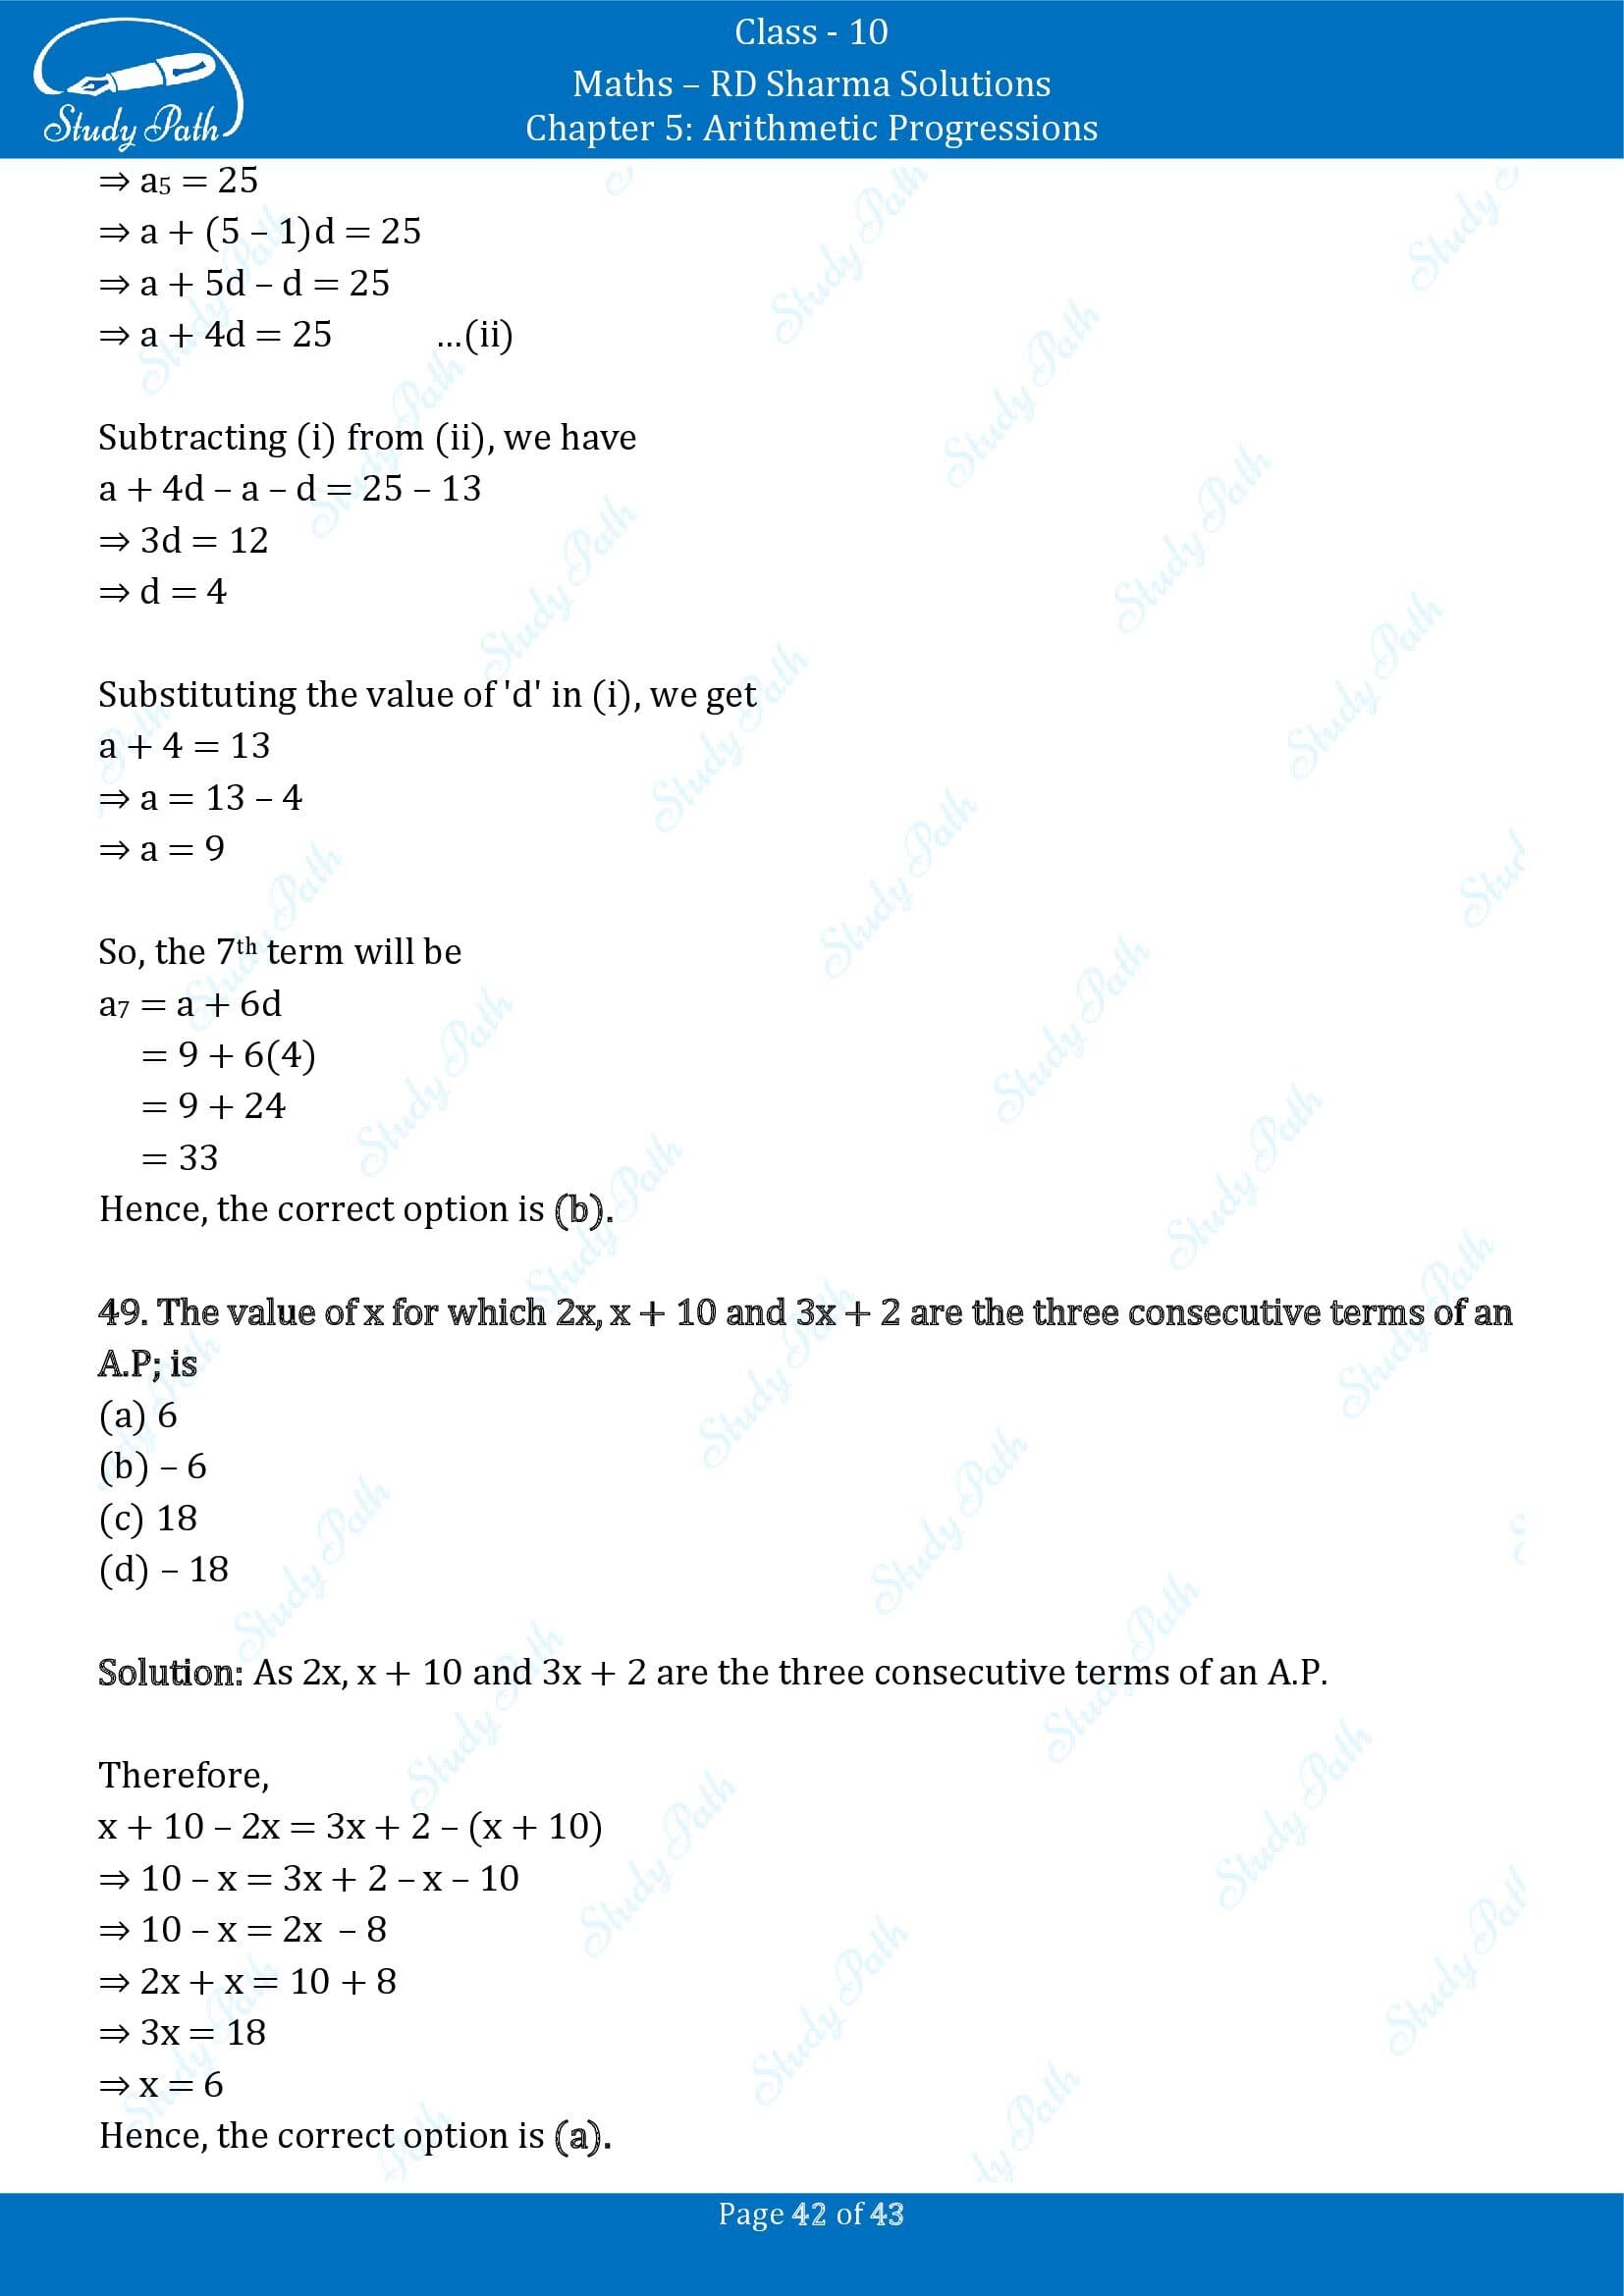 RD Sharma Solutions Class 10 Chapter 5 Arithmetic Progressions Multiple Choice Question MCQs 00042